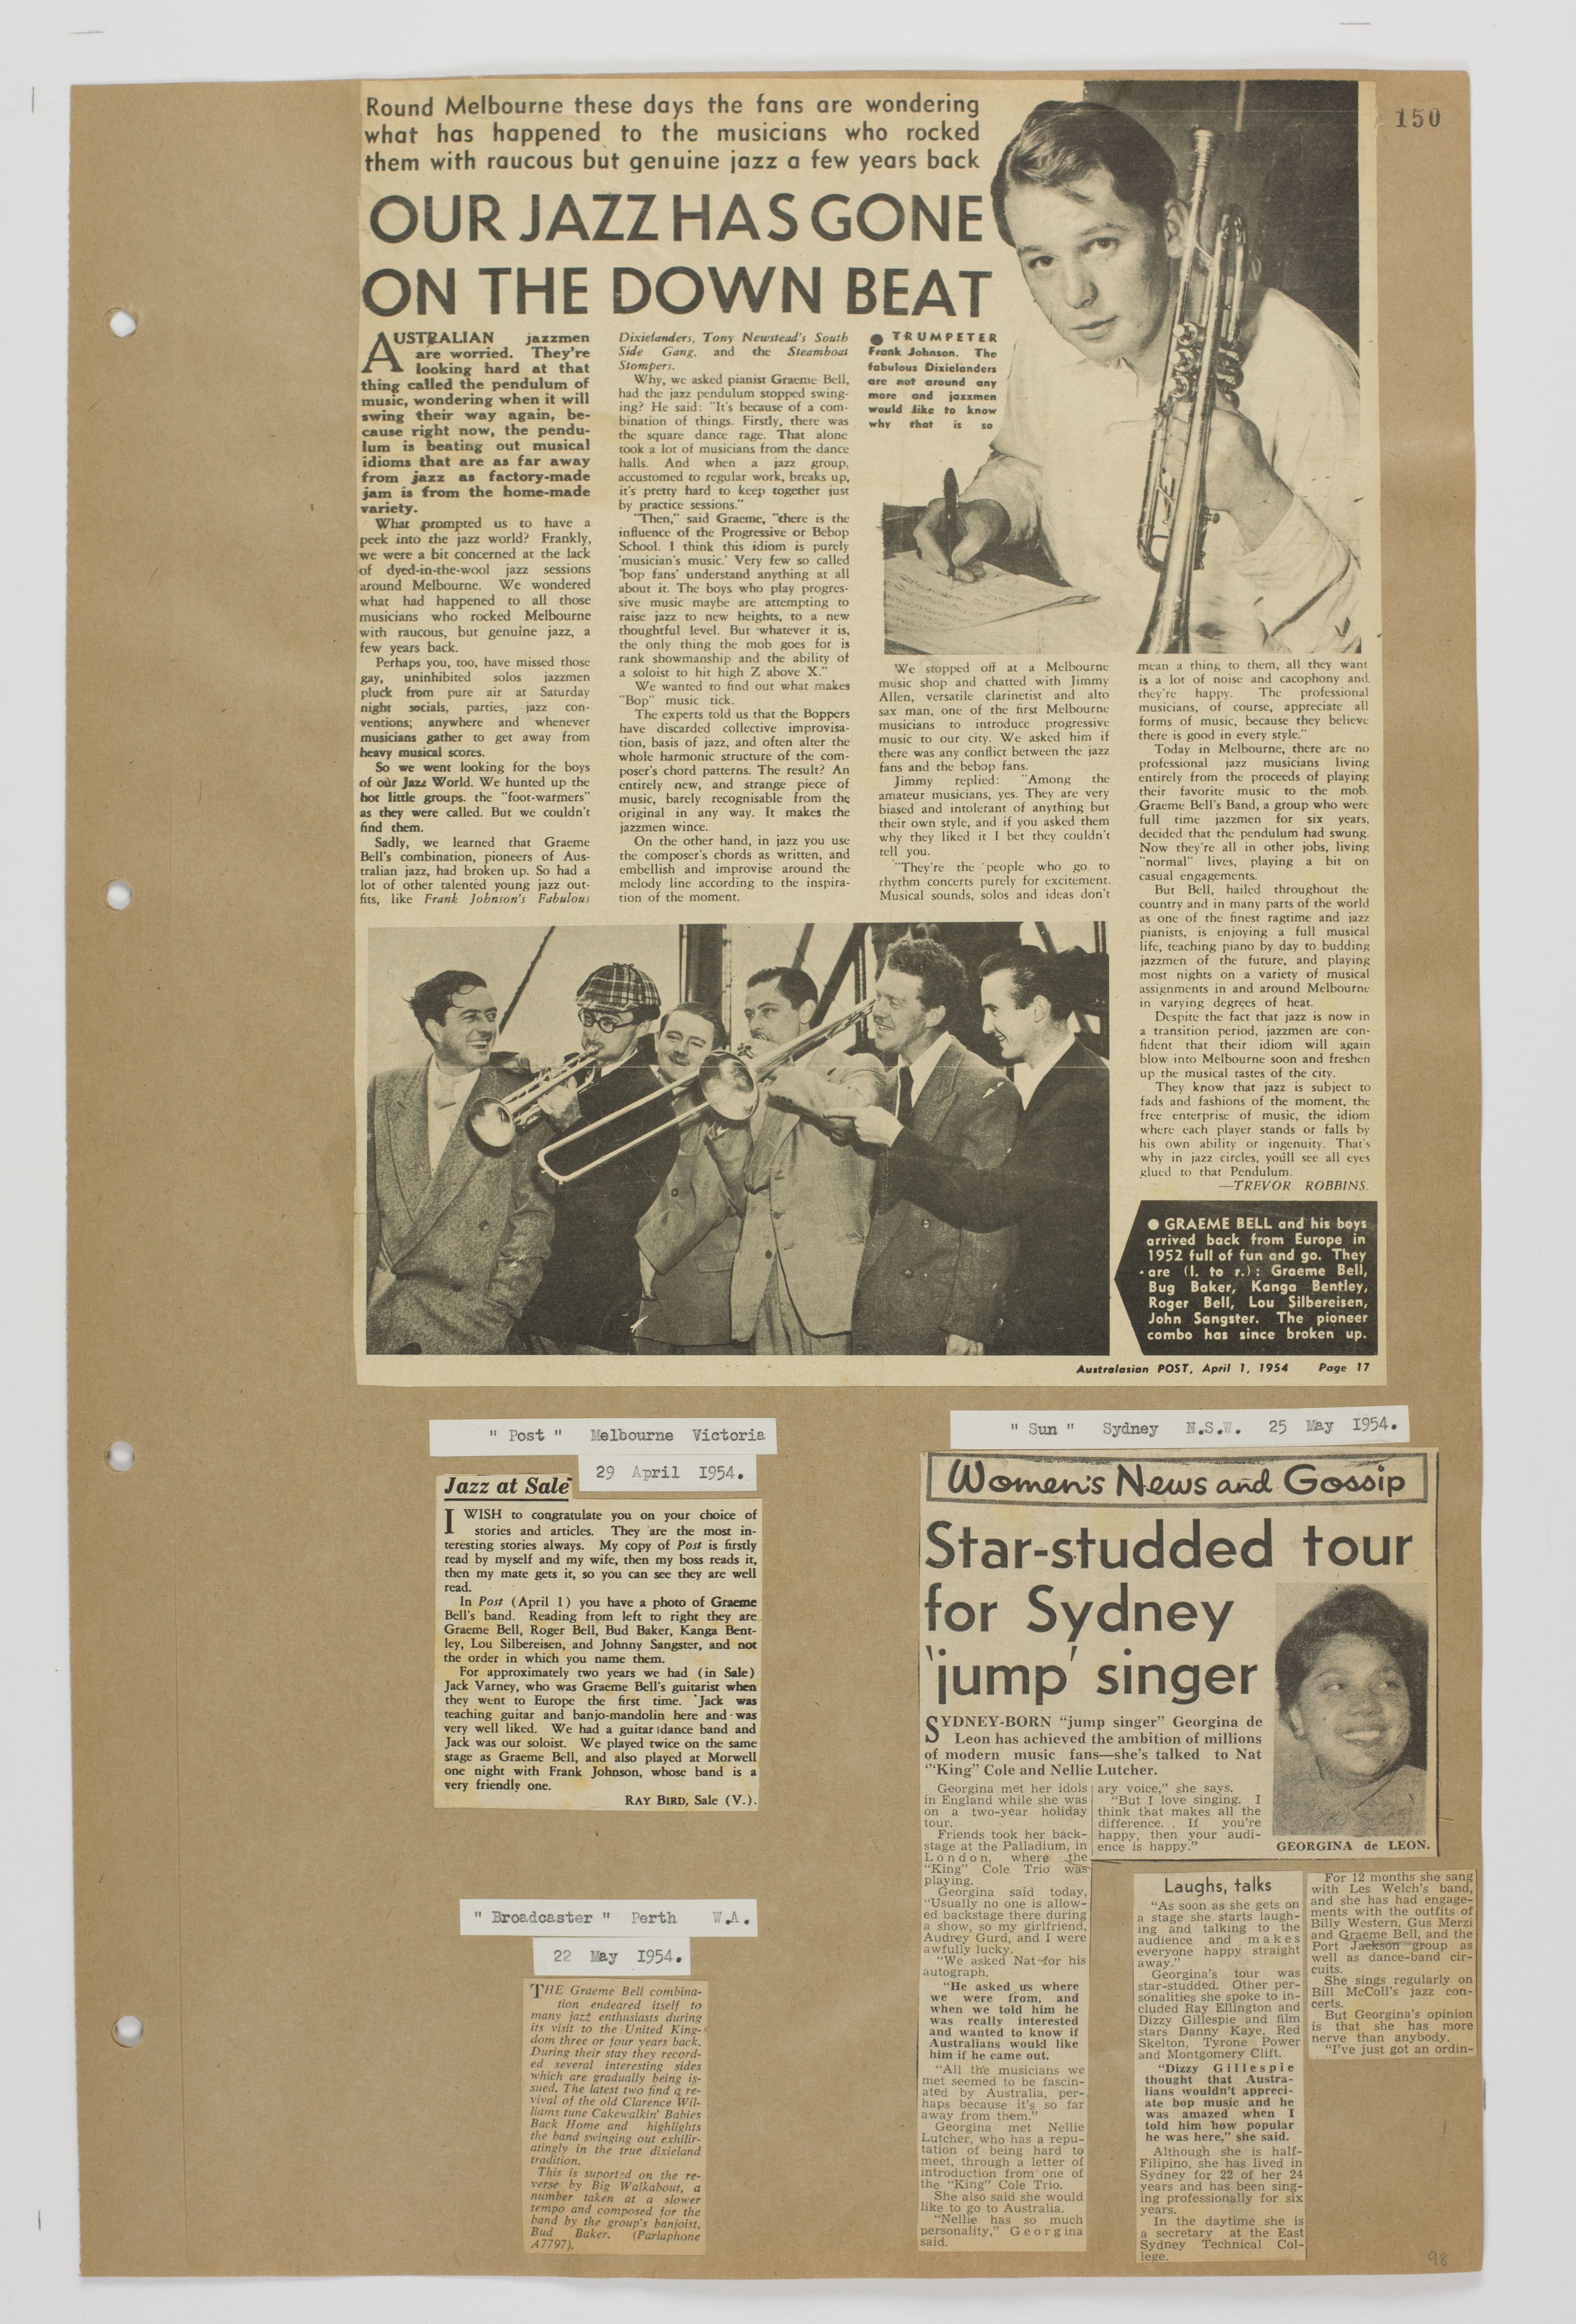 A page from Volume 2 of the Graeme Bell scrapbook collection.